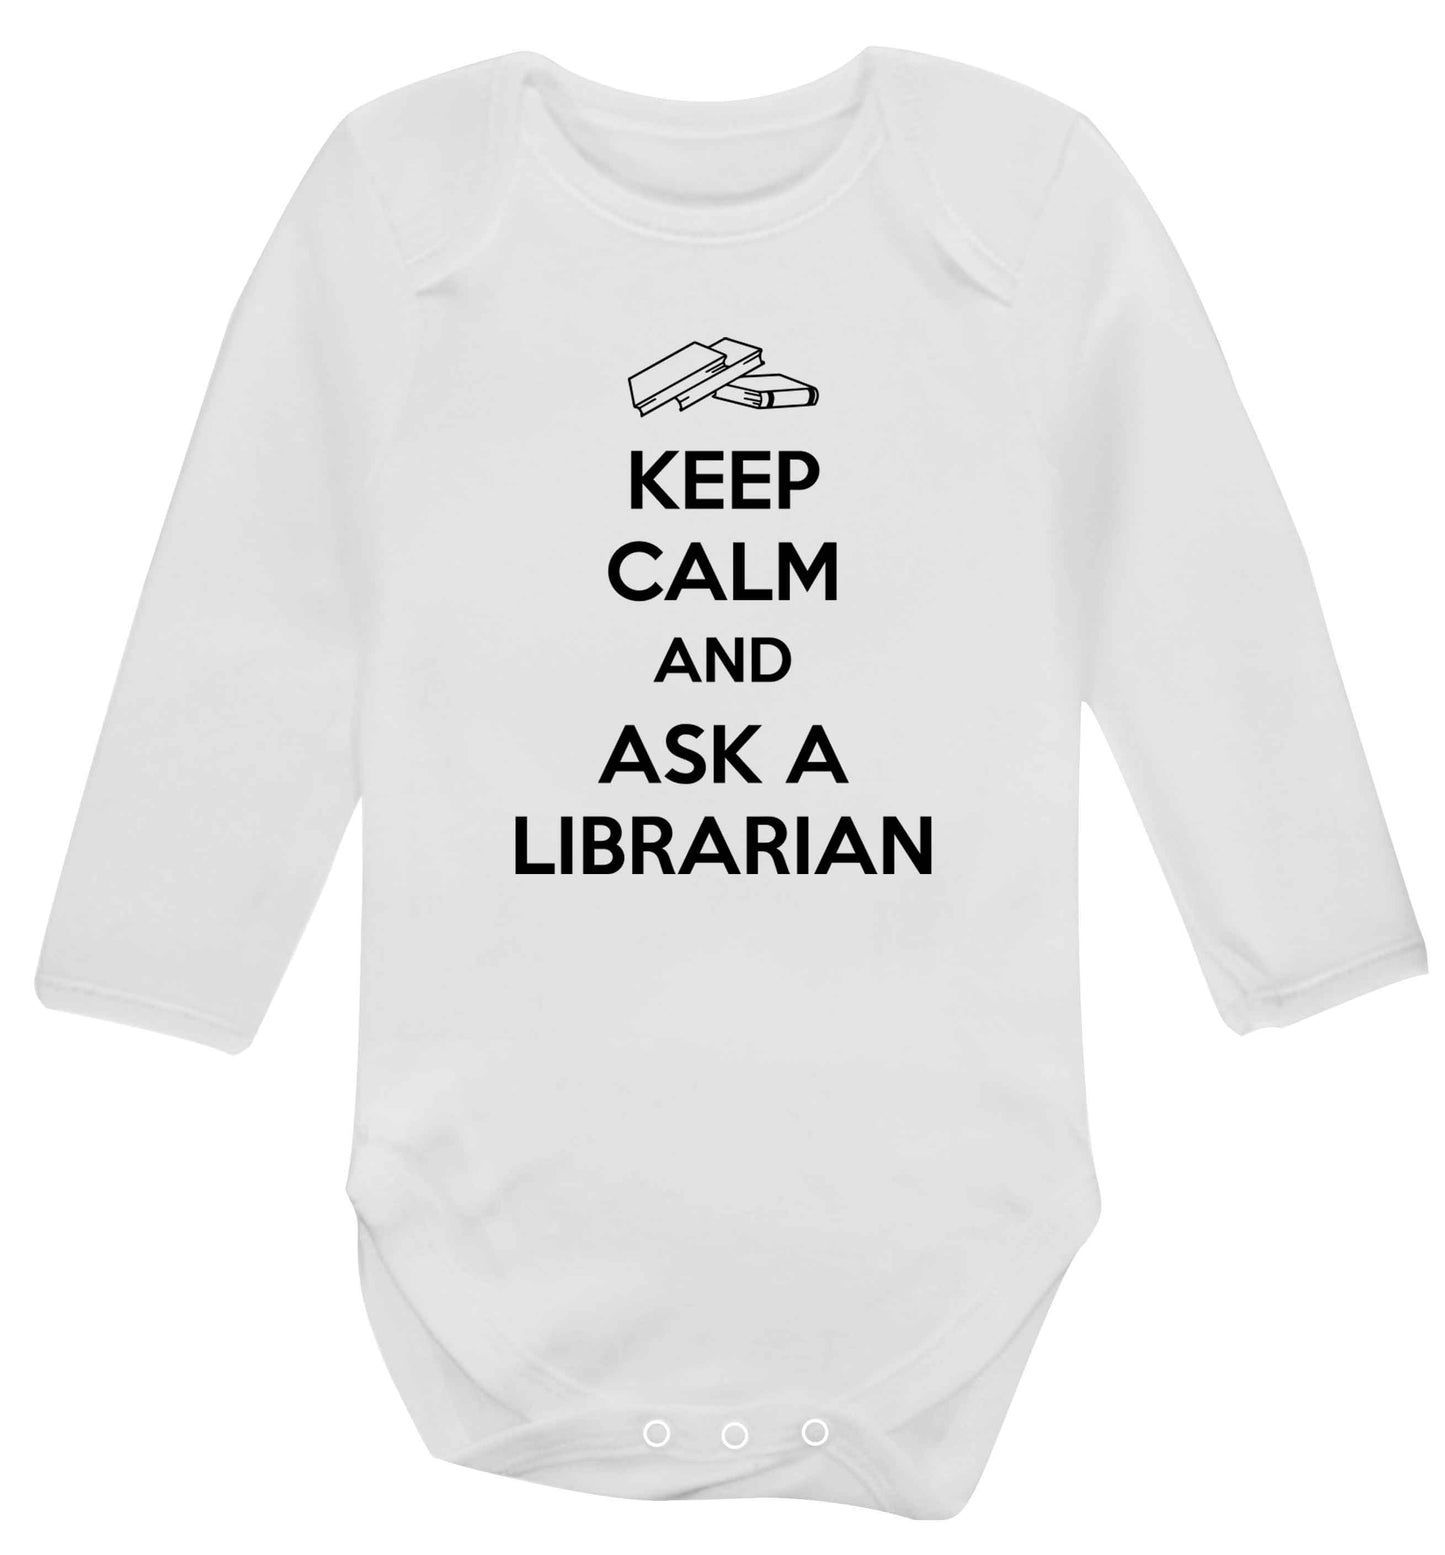 Keep calm and ask a librarian Baby Vest long sleeved white 6-12 months